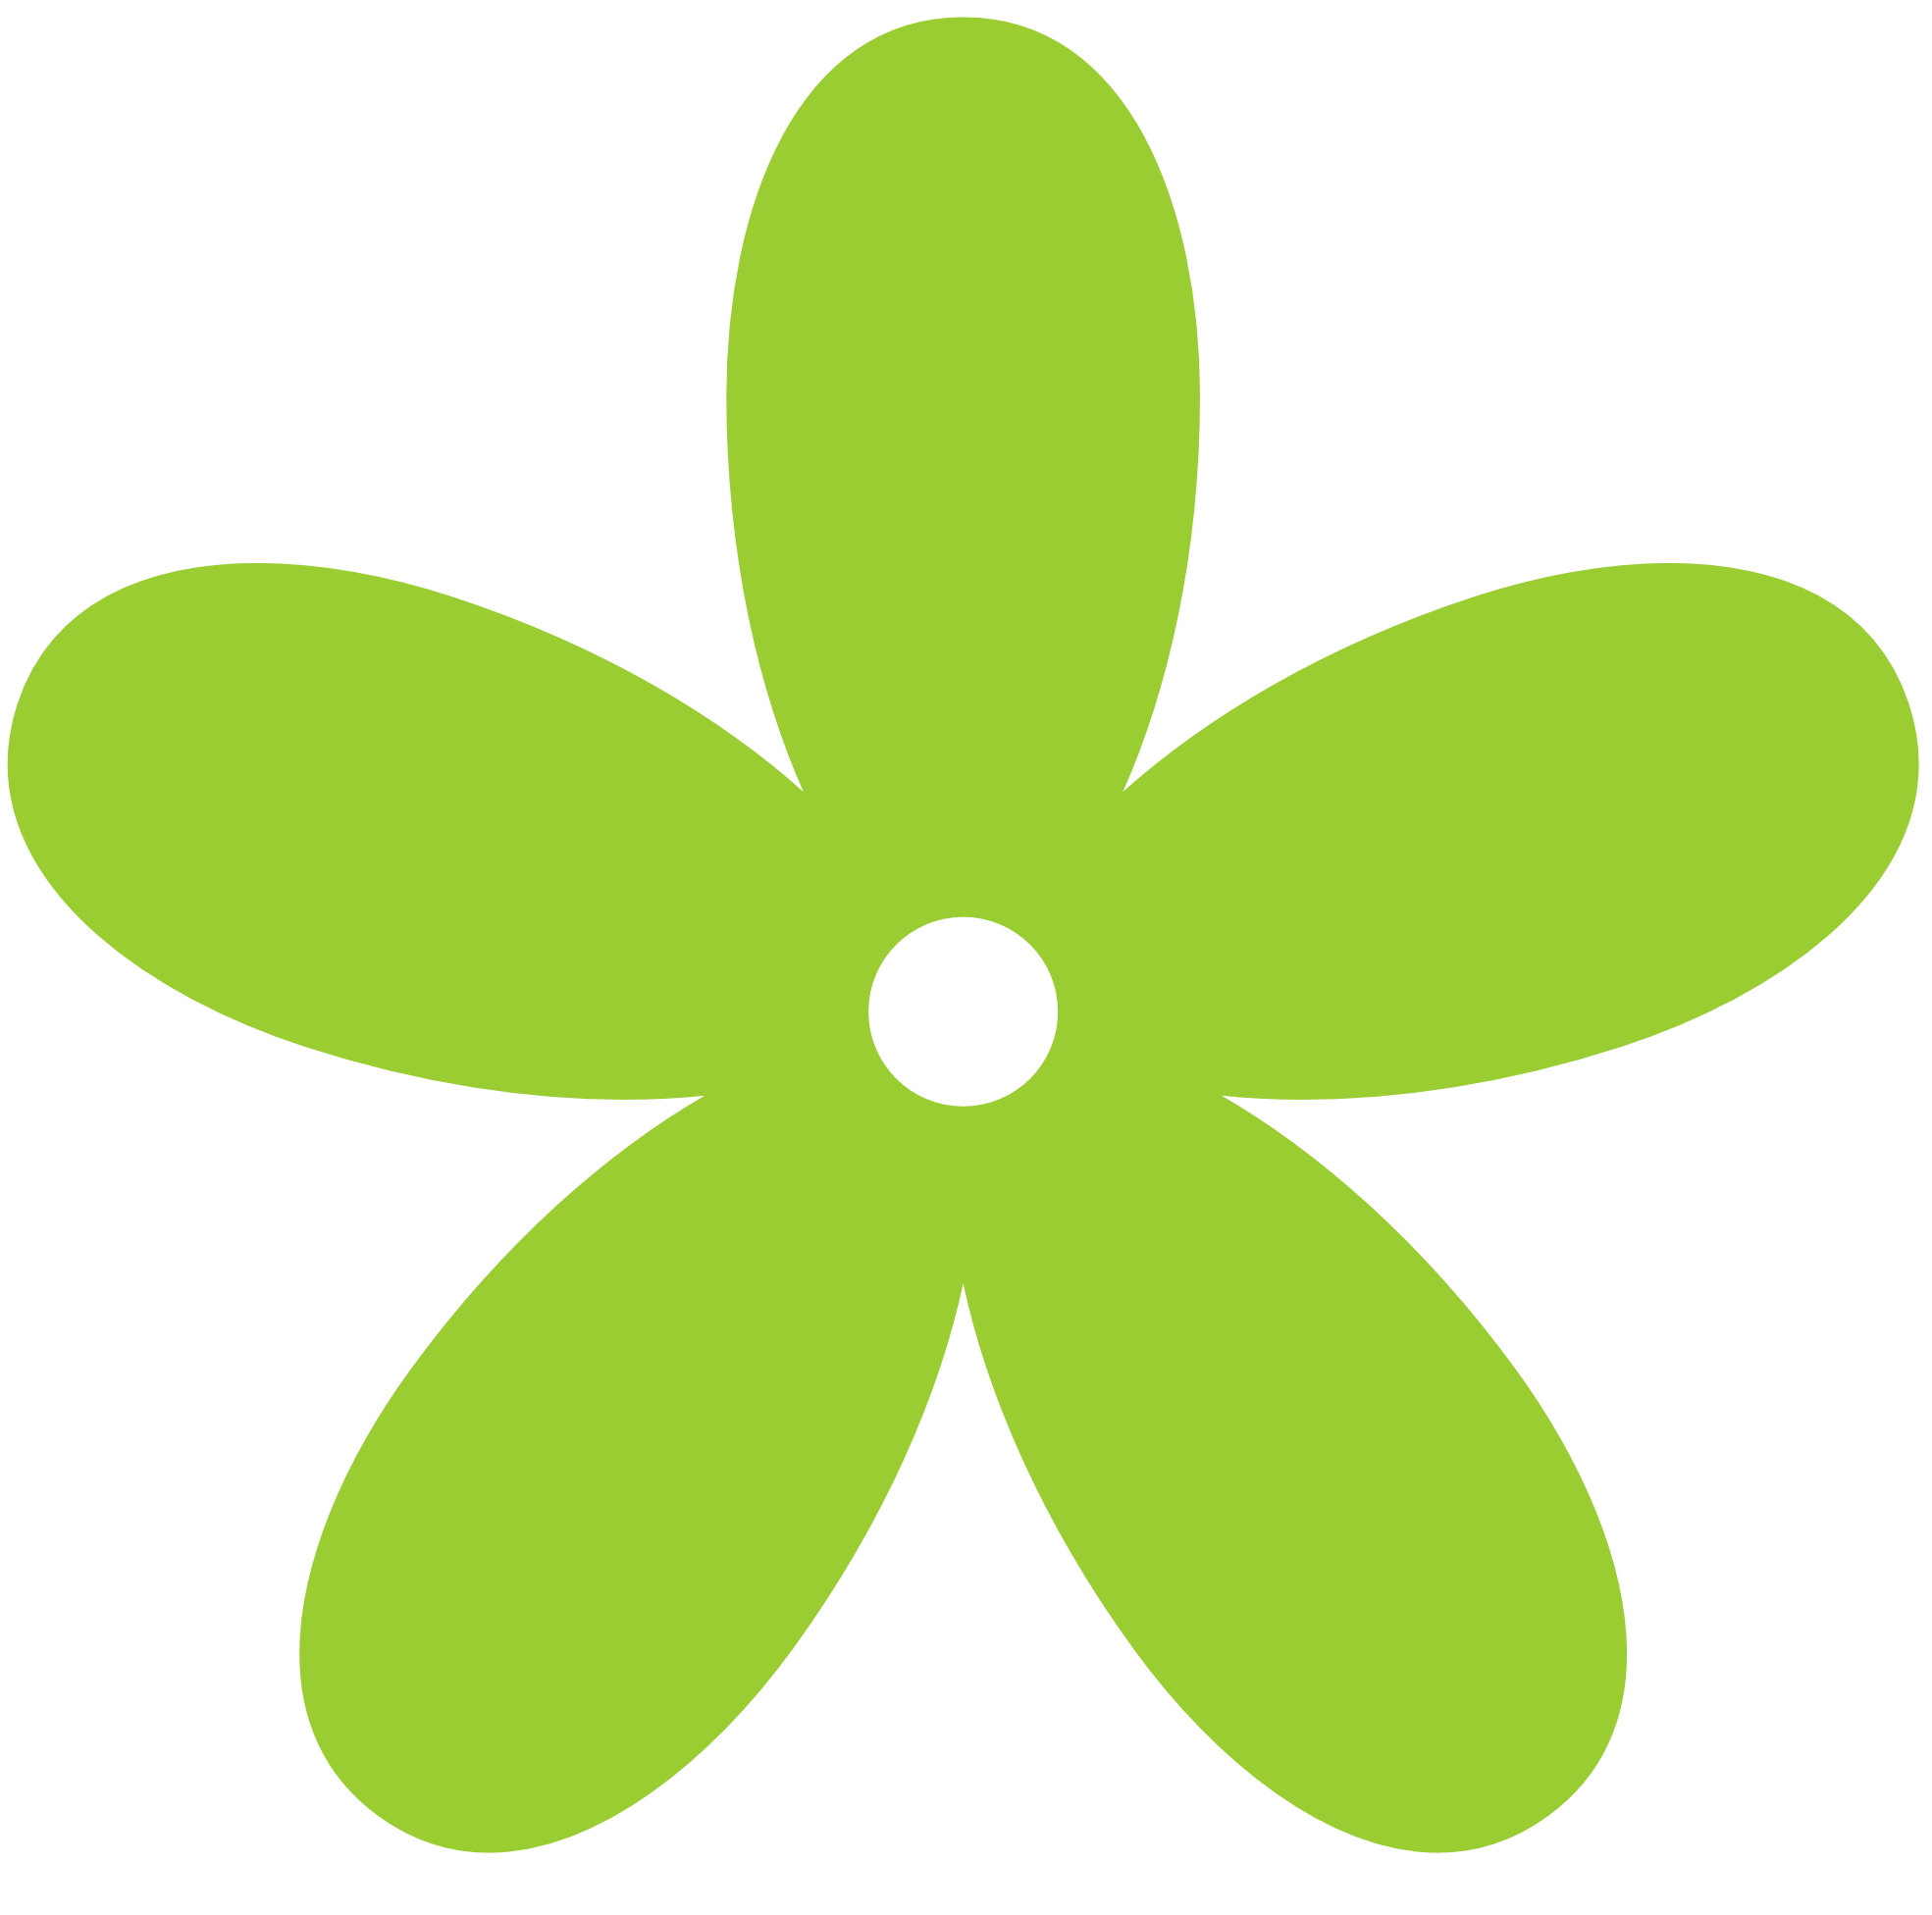 Flower silhouette at getdrawings. Lime clipart green star